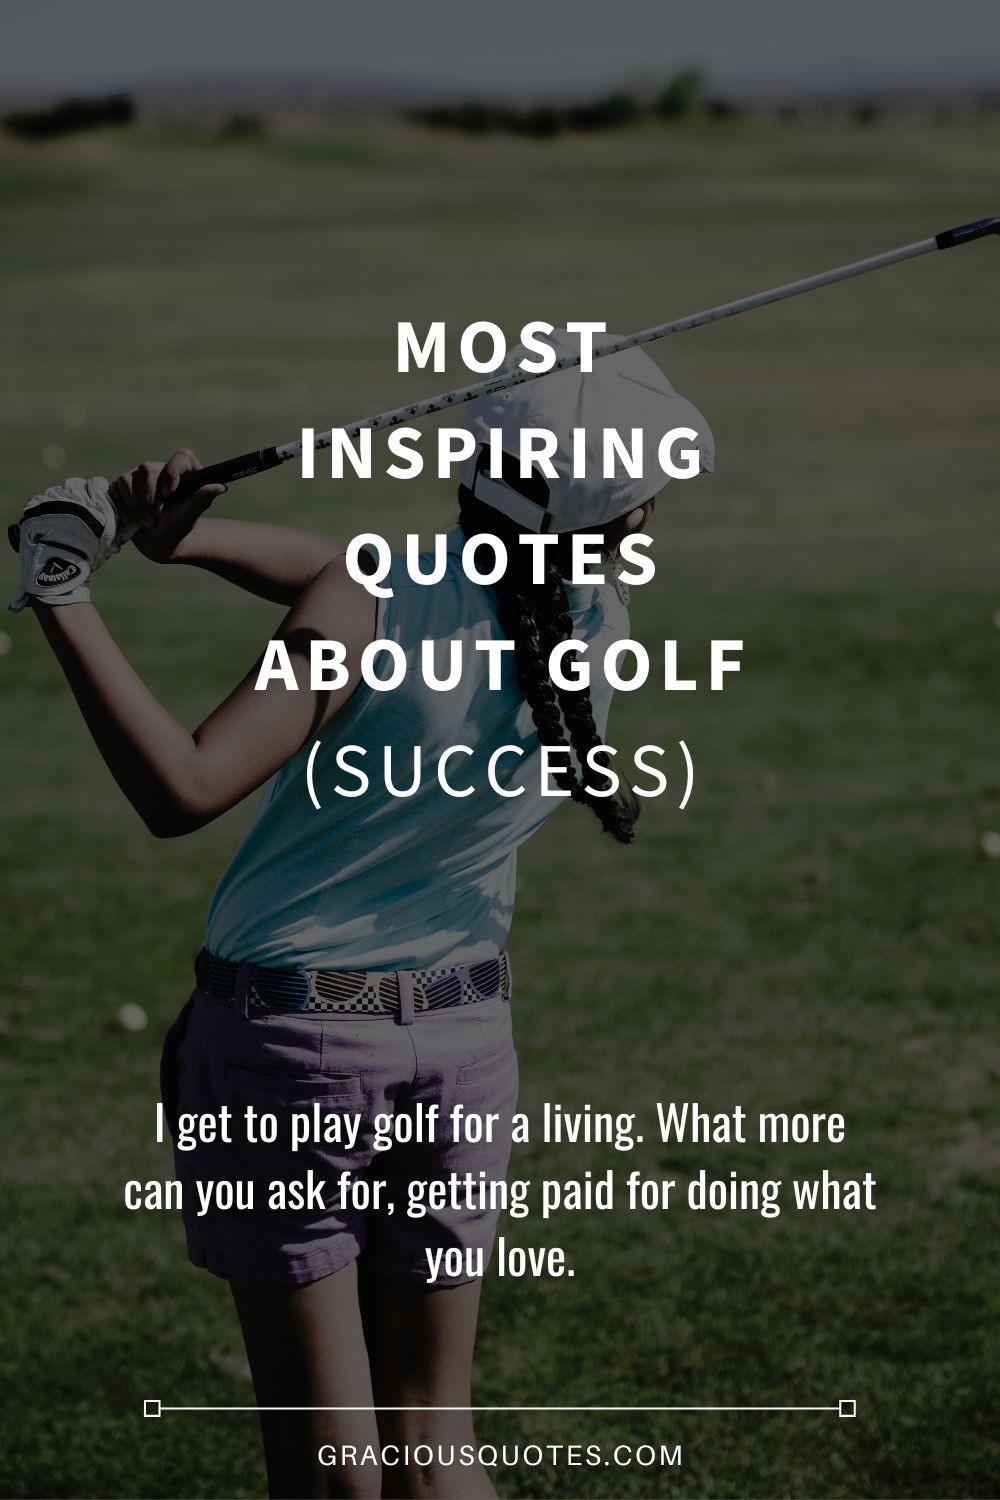 Most Inspiring Quotes About Golf (SUCCESS) - Gracious Quotes